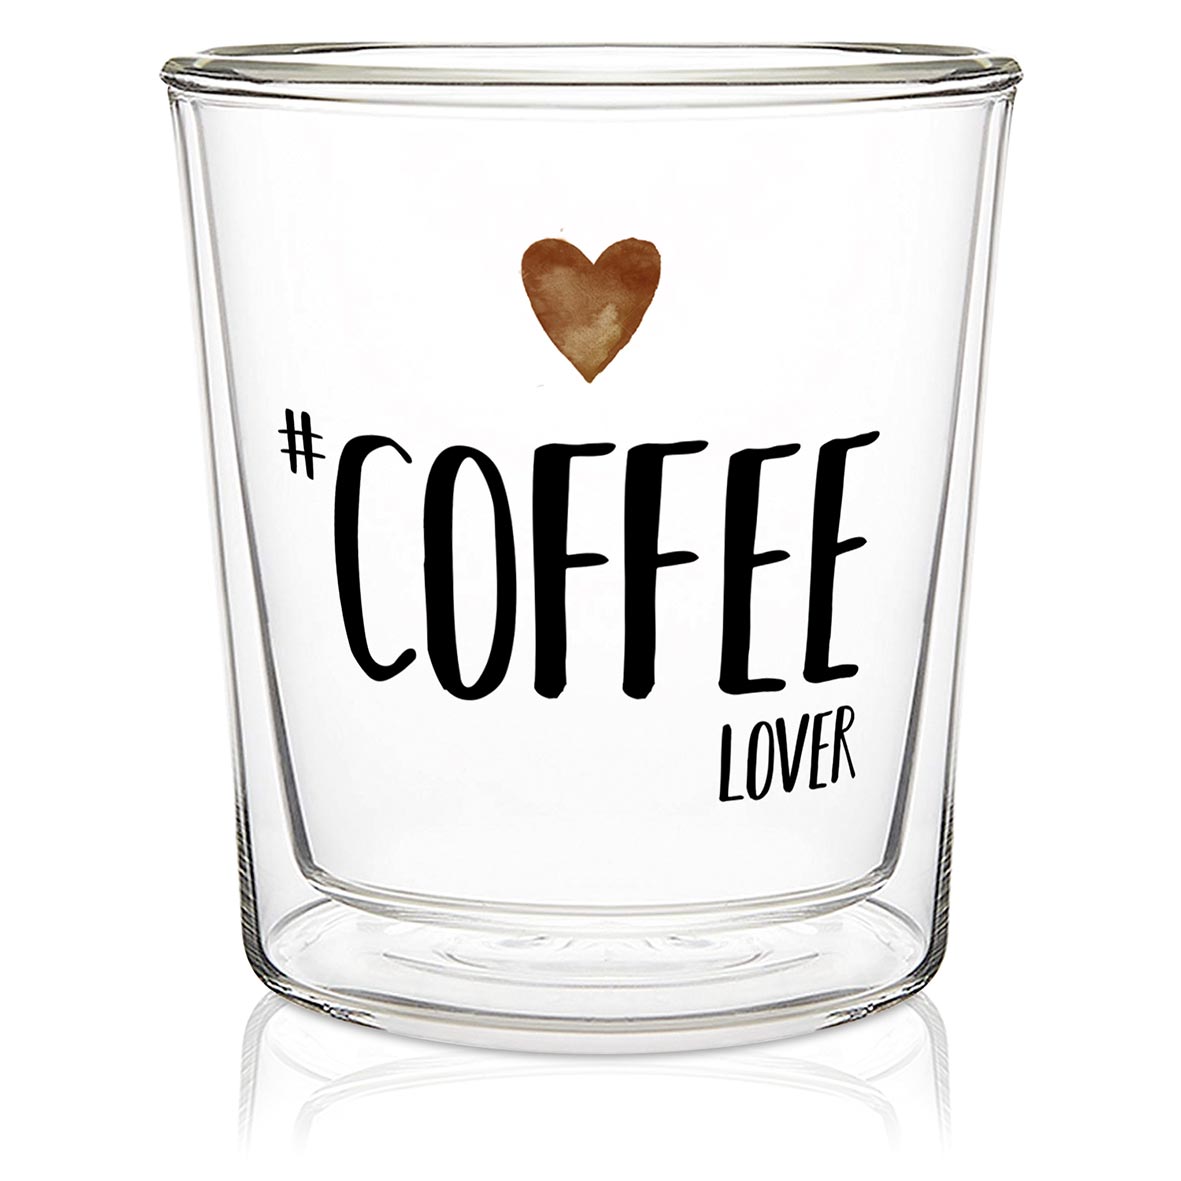 Coffee Lover - Double wall Trend Glas von PPD